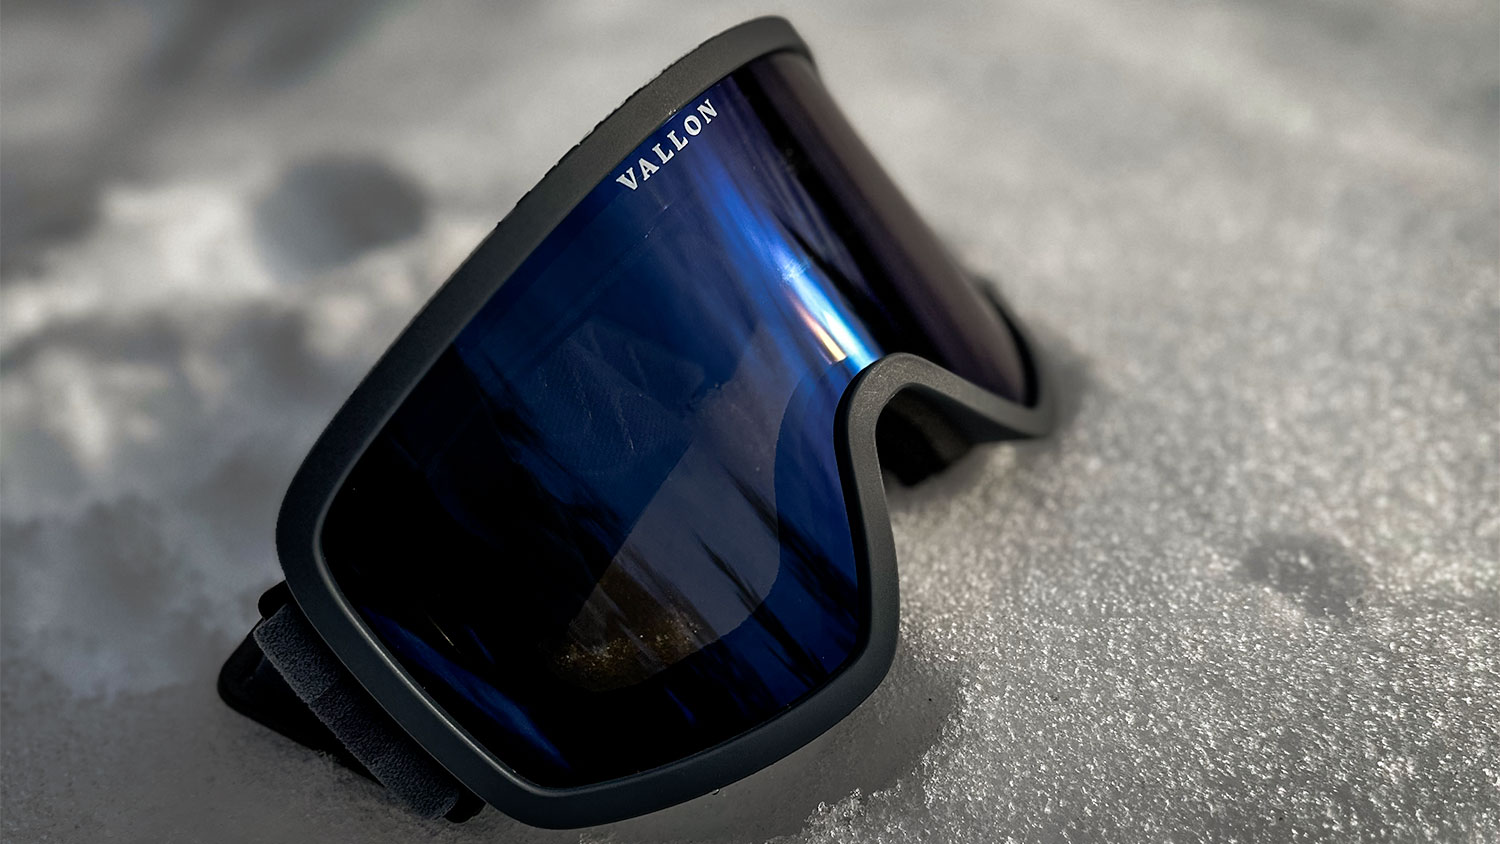 The Stairways goggles from Vallon | Review